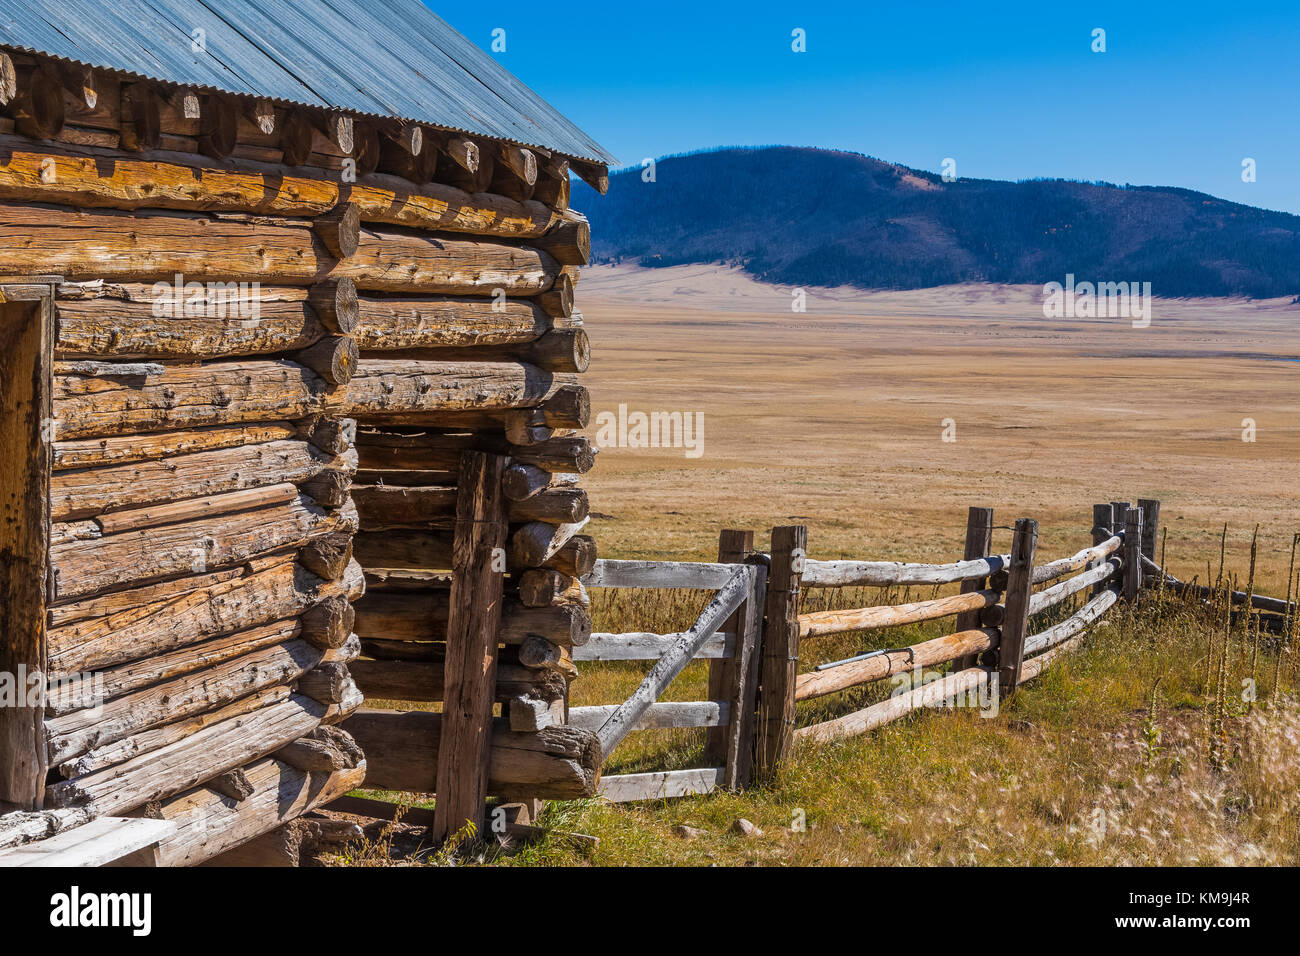 Log barn on a historic ranch in Valles Grande within Valles Caldera National Preserve, a preserve run by the National Park Service, New Mexico, USA Stock Photo